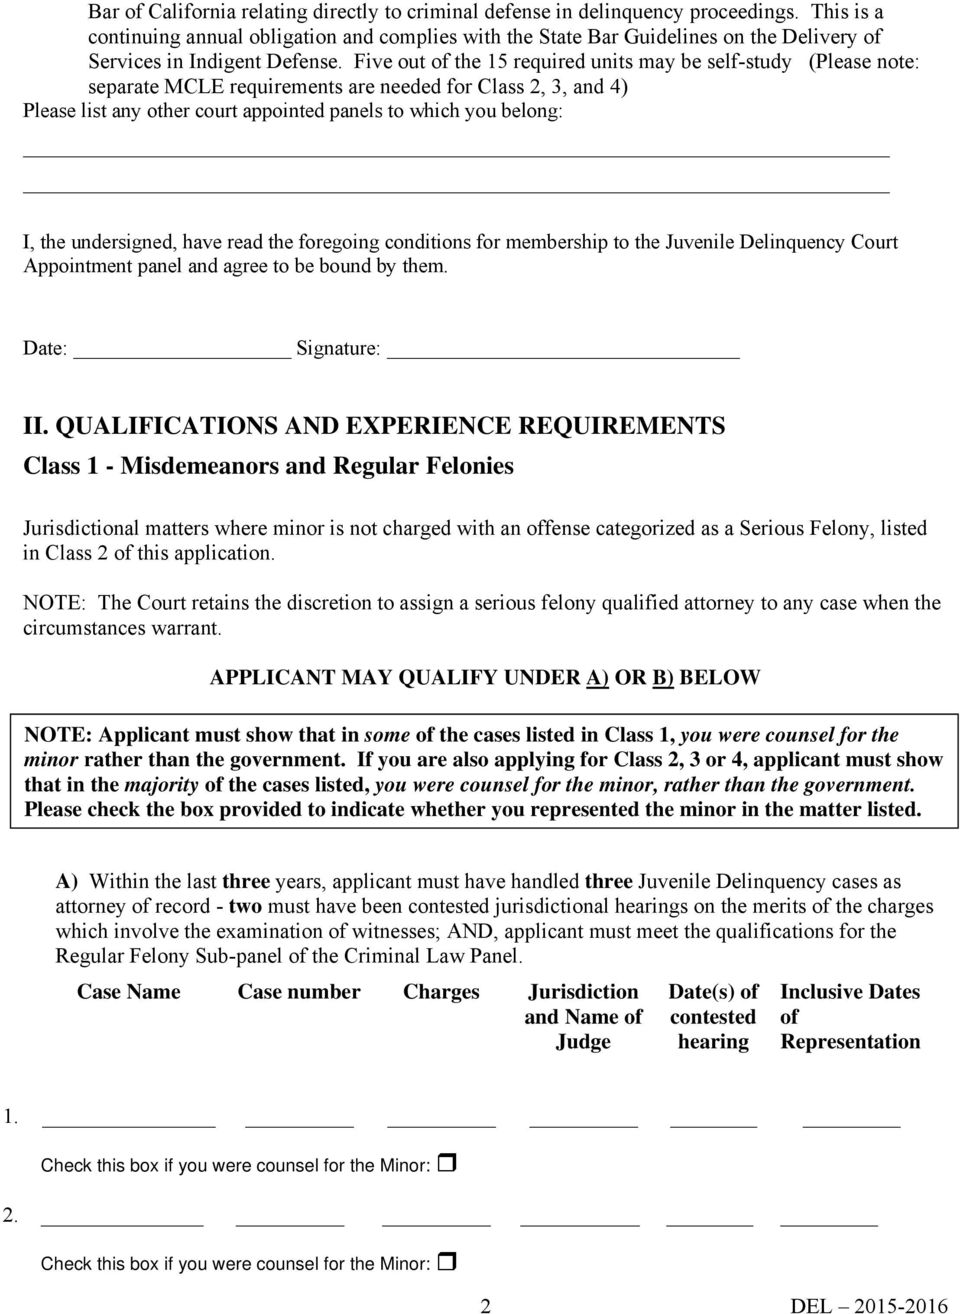 Five out of the 15 required units may be self-study (Please note: separate MCLE requirements are needed for Class 2, 3, and 4) Please list any other court appointed panels to which you belong: I, the